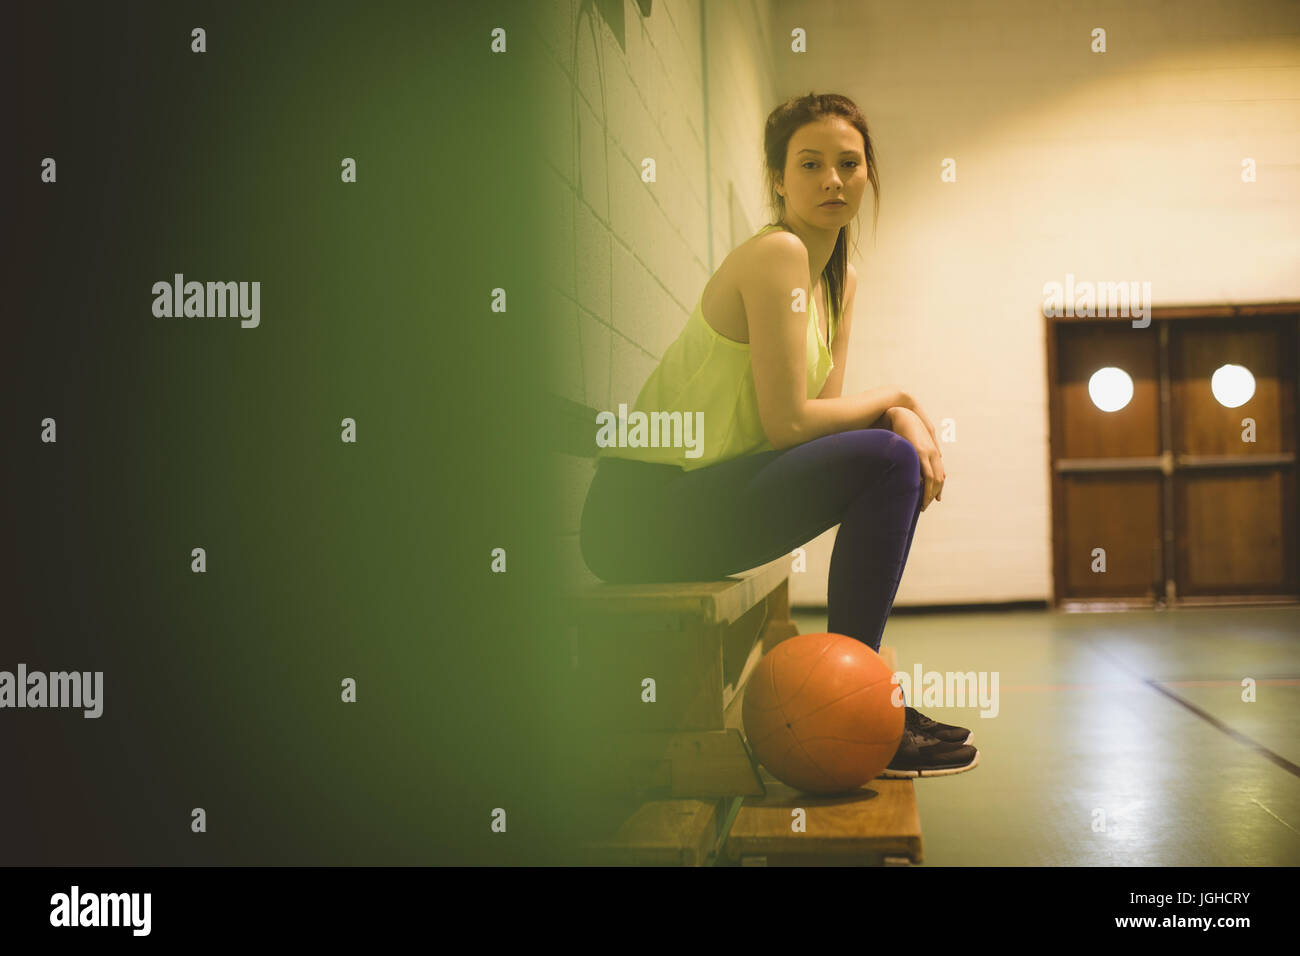 Side view full length portrait of female basketball player sitting on bench Stock Photo